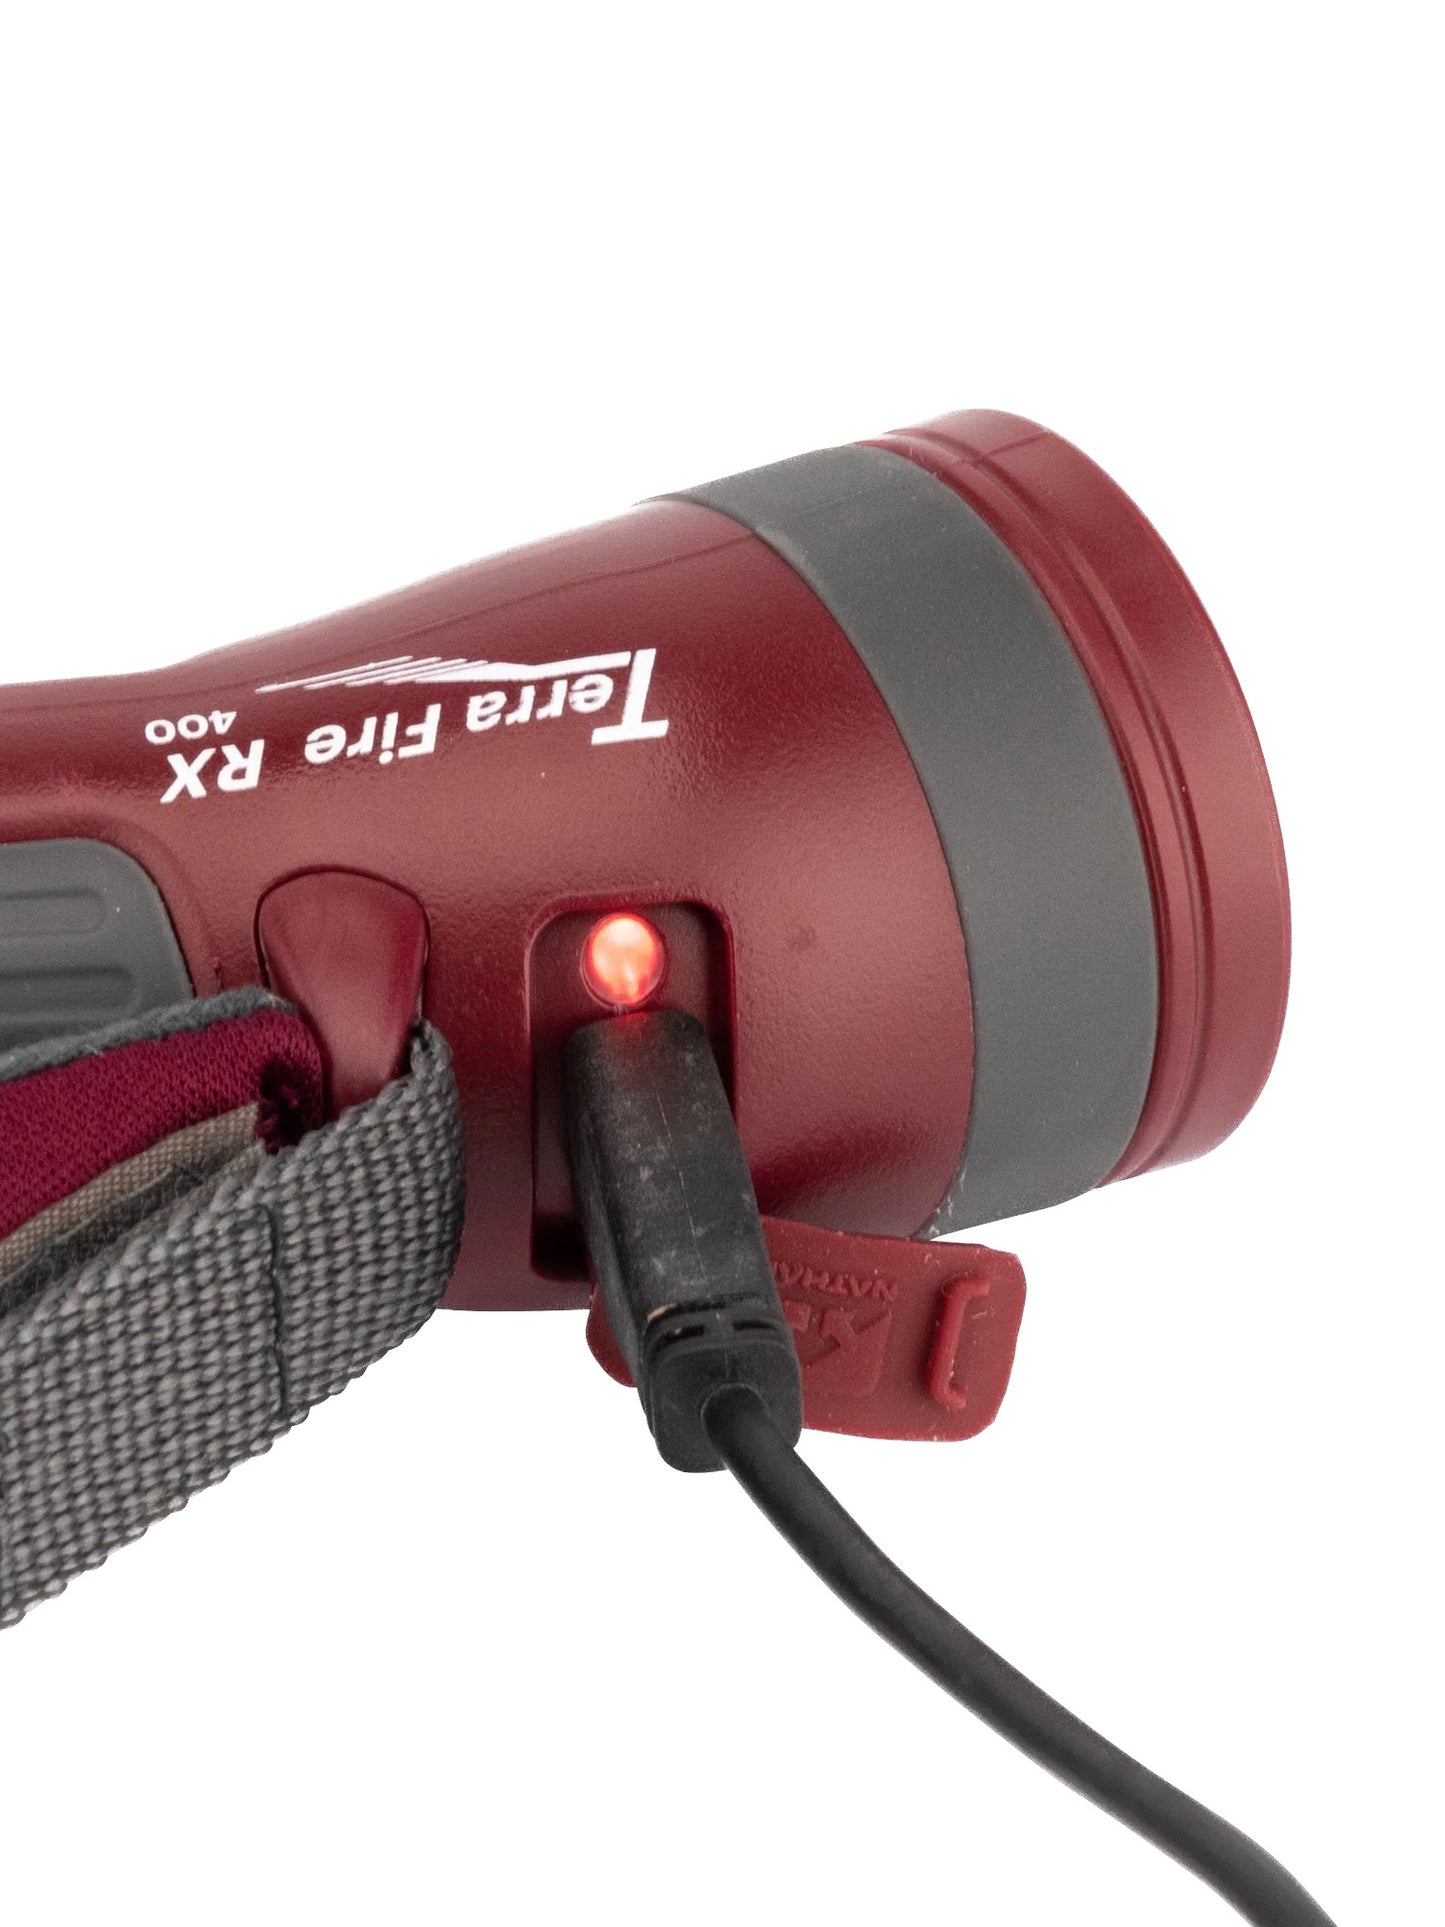 TERRA FIRE HAND TORCH 400 RECHARGEABLE